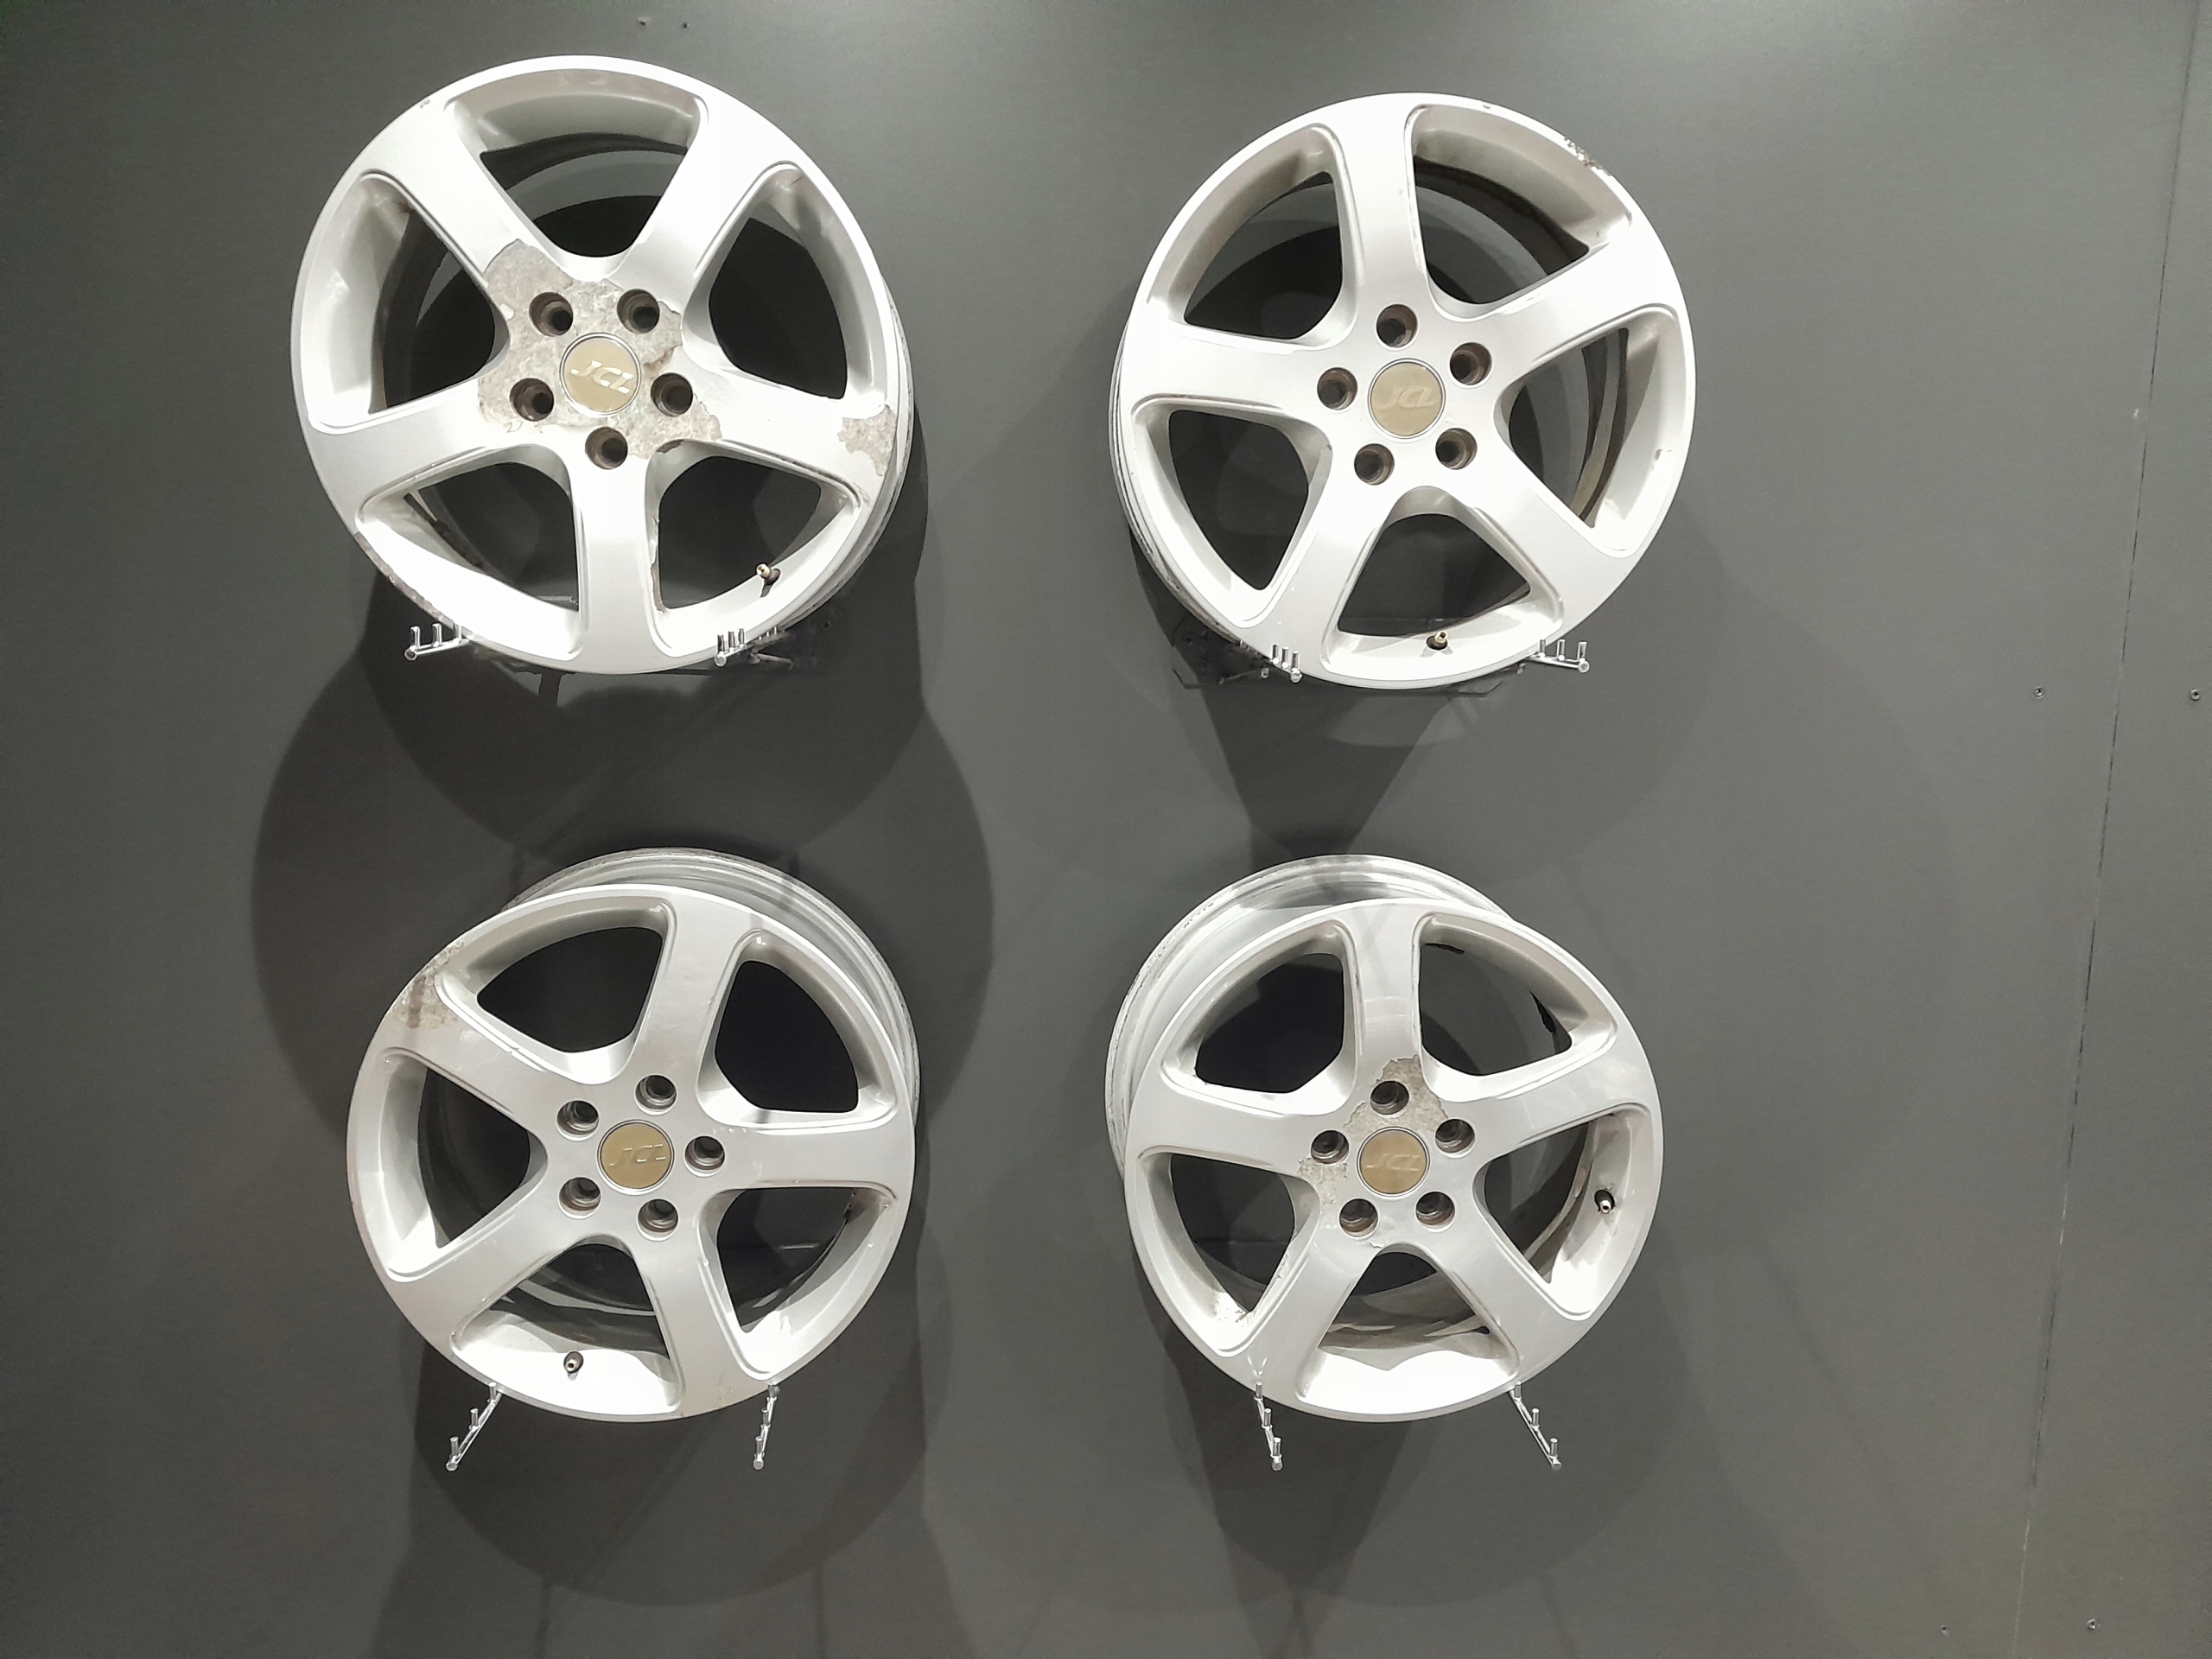 Диски 16 5x108 ford focus, s-max (f6472-19)